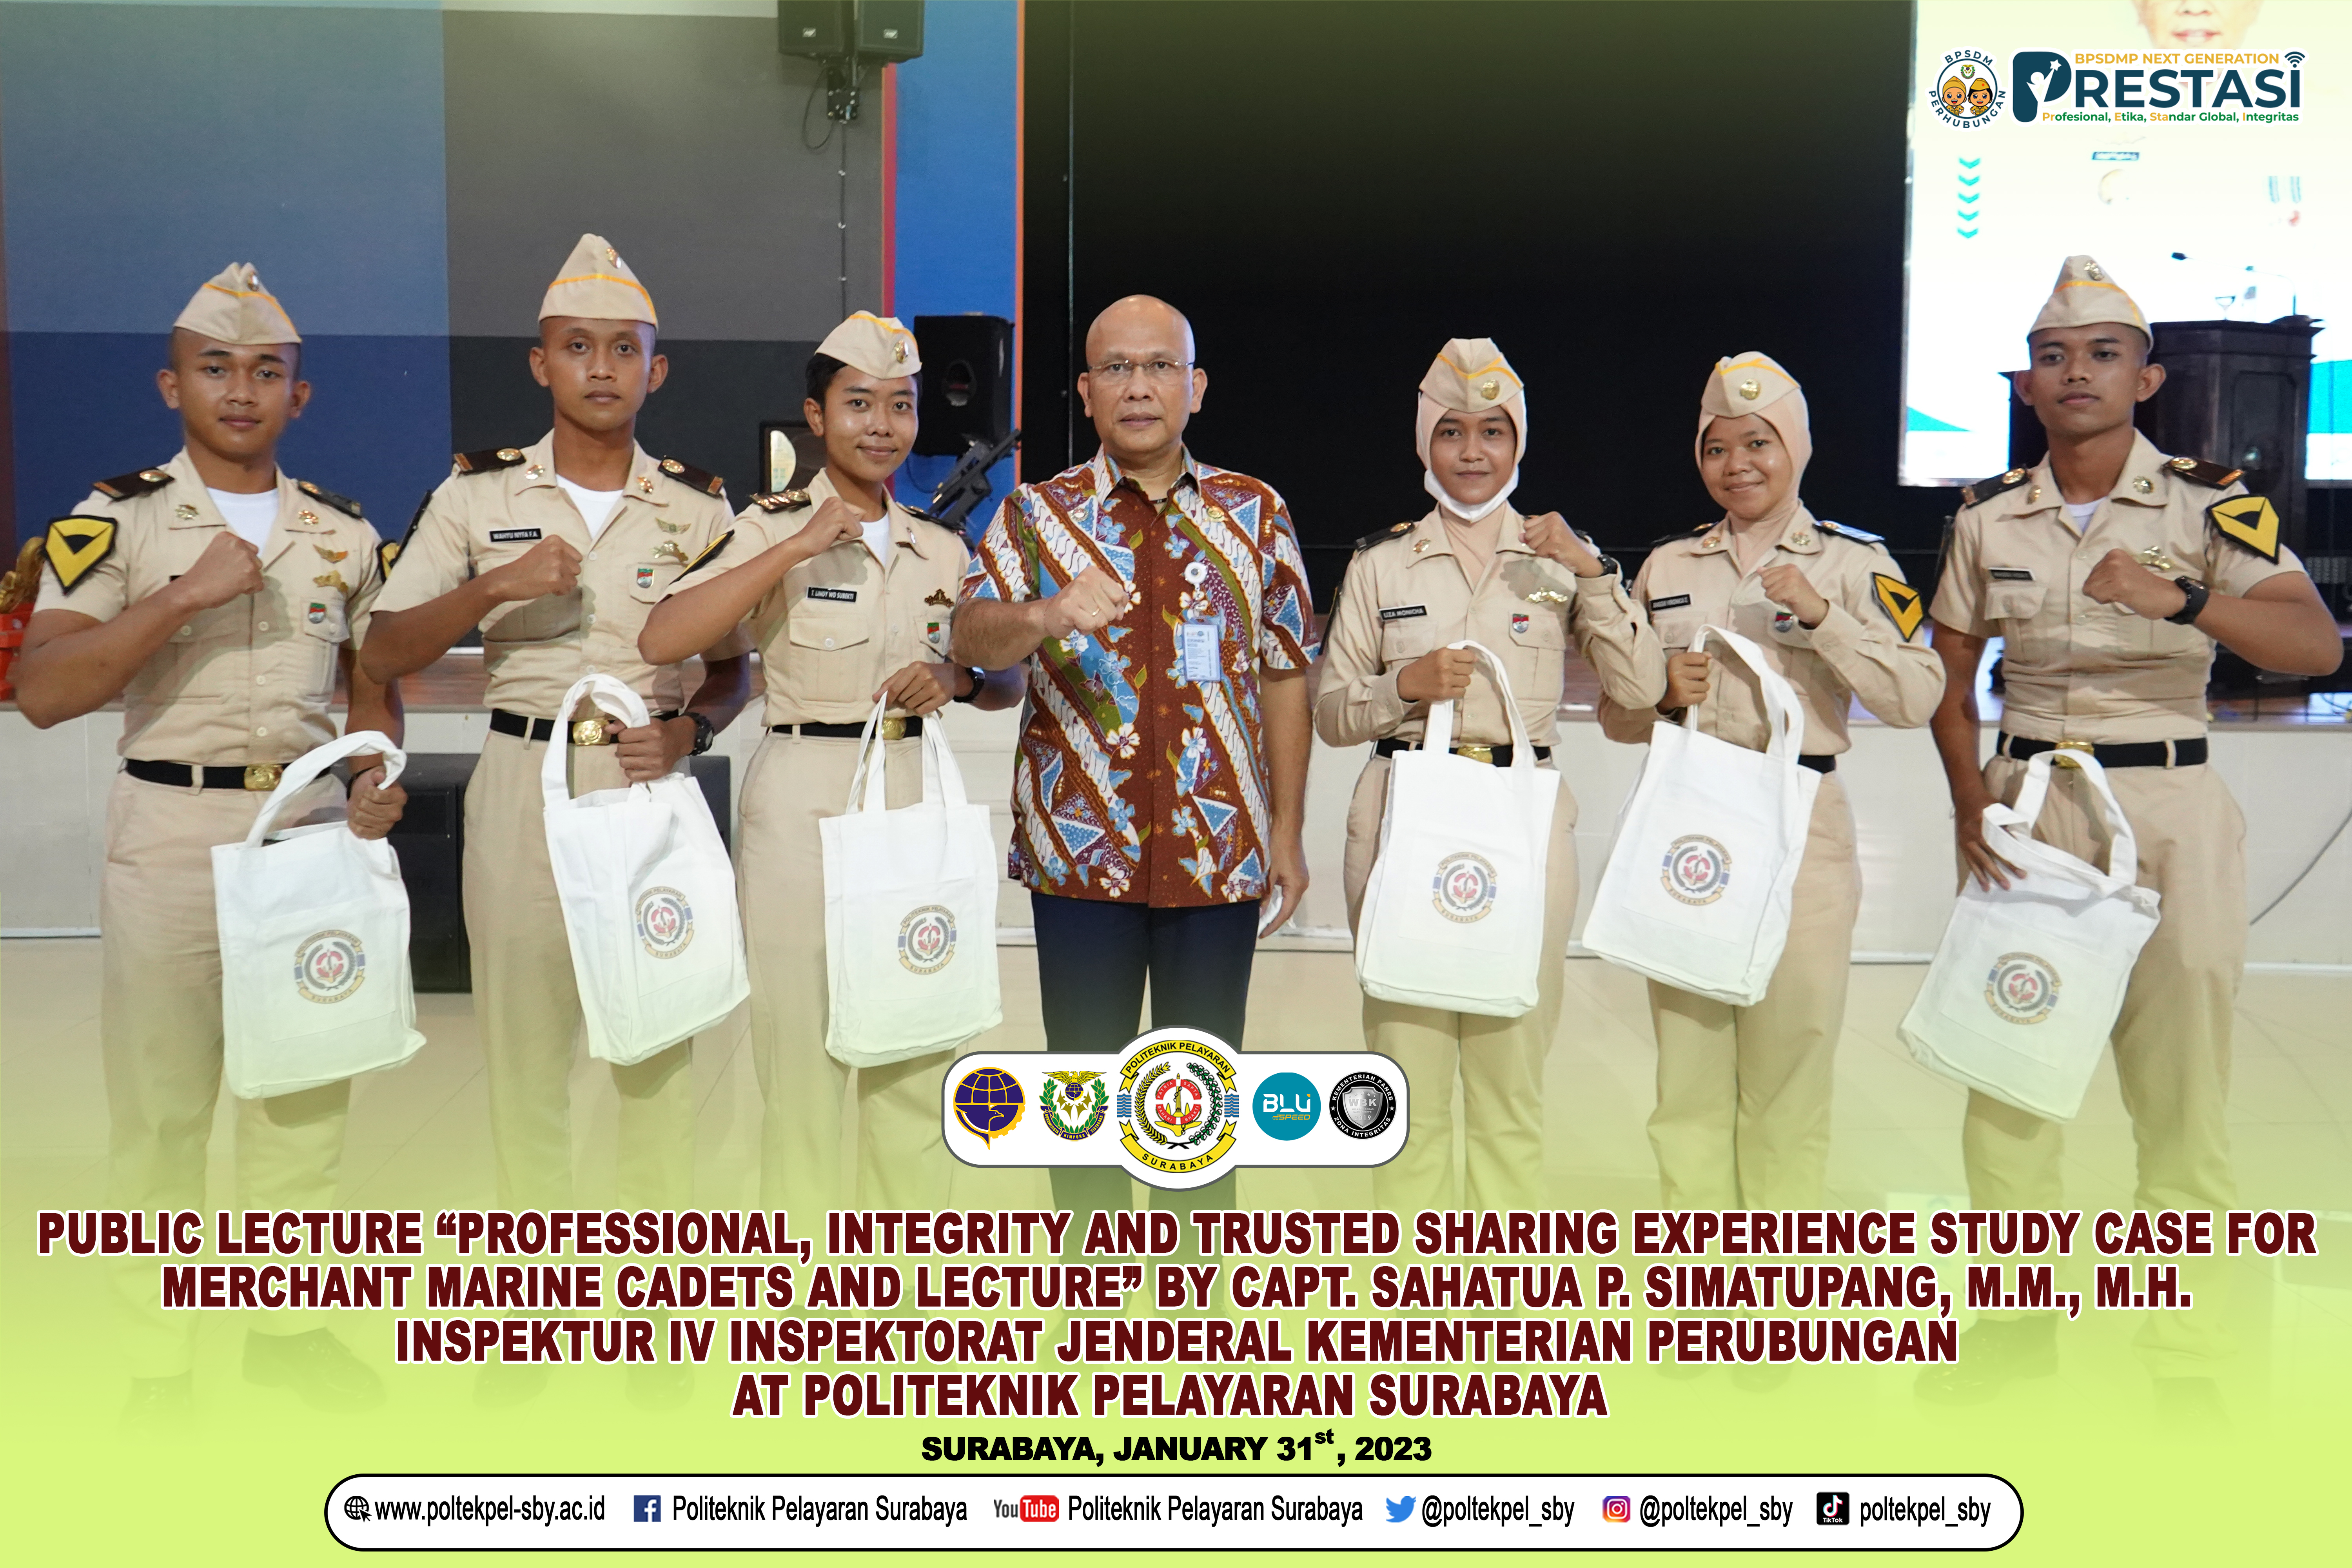 Kuliah Umum “Sharing Experience Professional, Integrity and Trusty for Lecturers and (Polbit) Cadets” By Capt. Sahattua P. Simatupang, M.M., M.H.